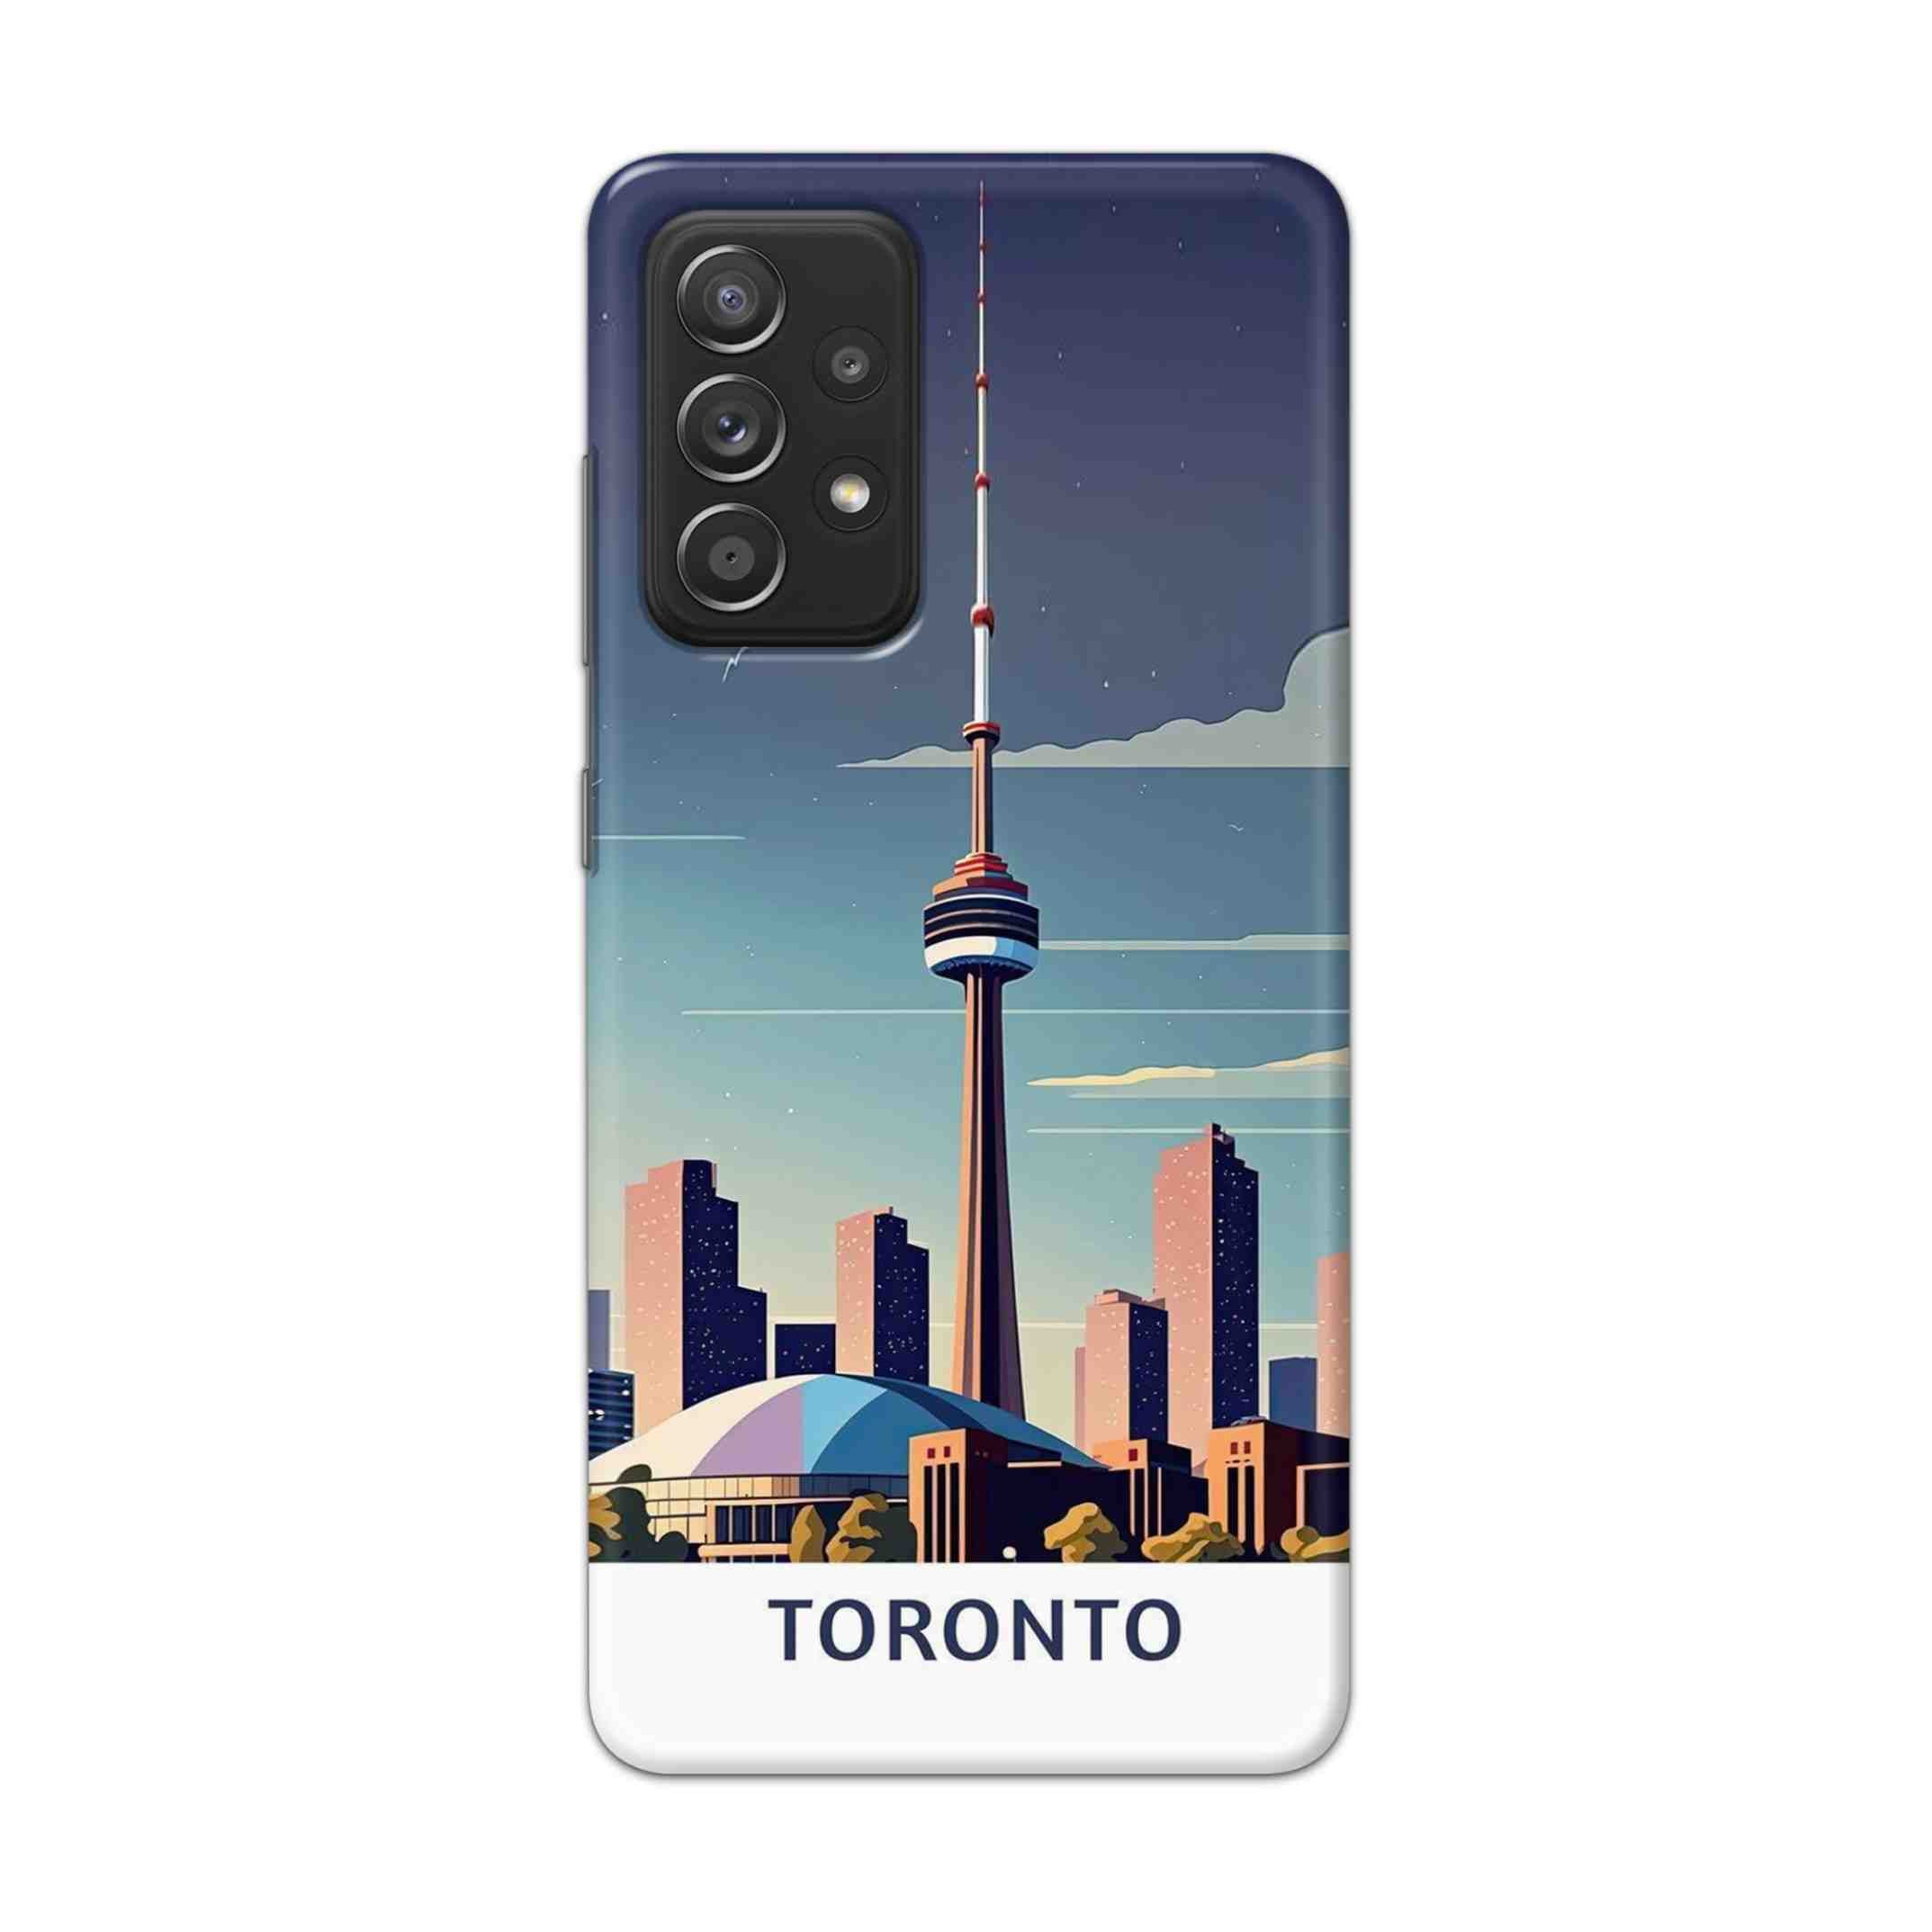 Buy Toronto Hard Back Mobile Phone Case Cover For Samsung Galaxy A52 Online